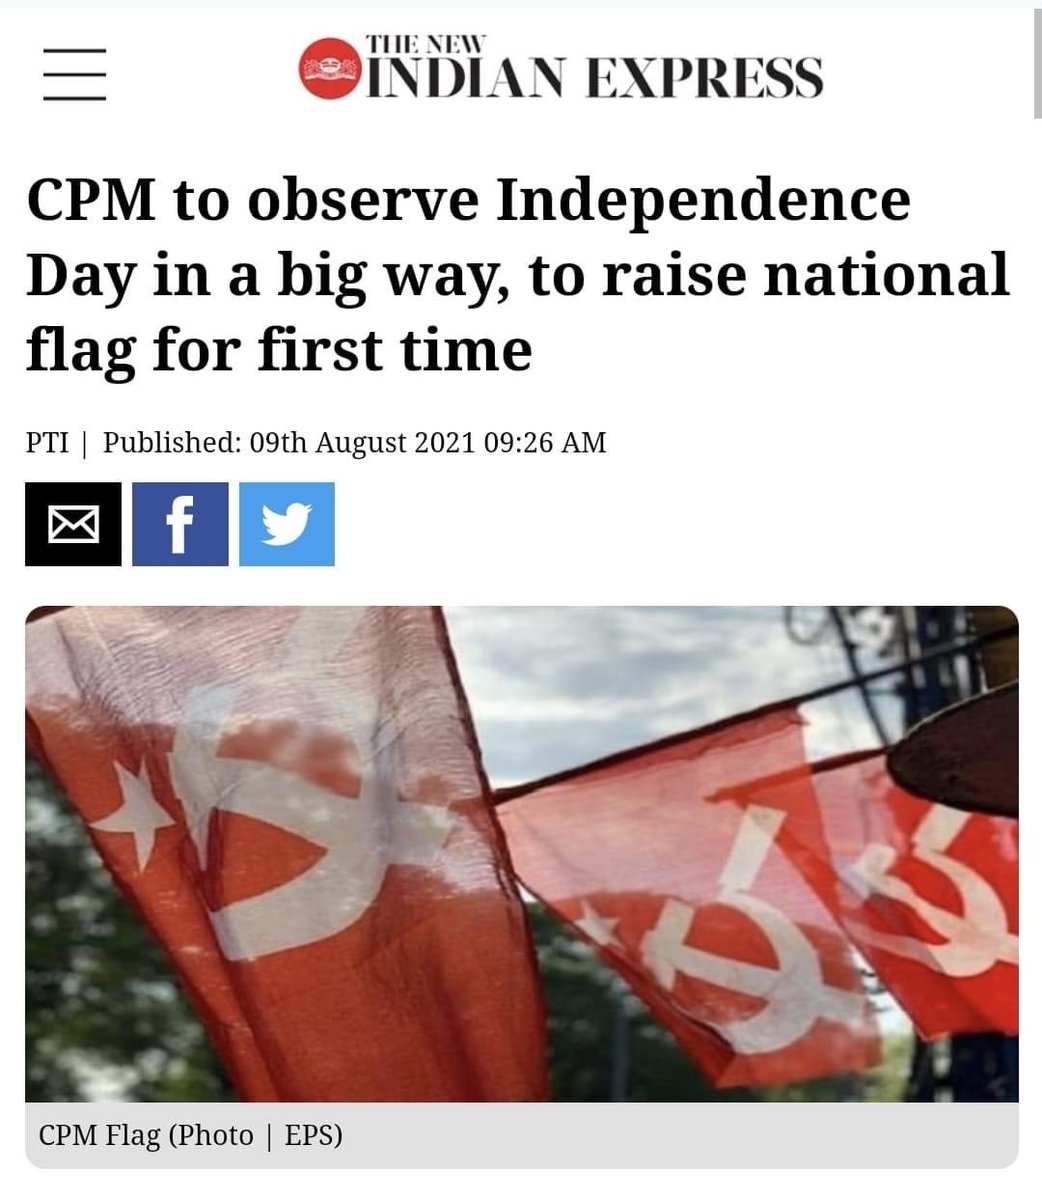 Communist Party started acknowledging Indian republic day by holding Indira Gandhi version of 'Constitution of India' Same CPM's first Independence day celebrated on 15 Aug 2021